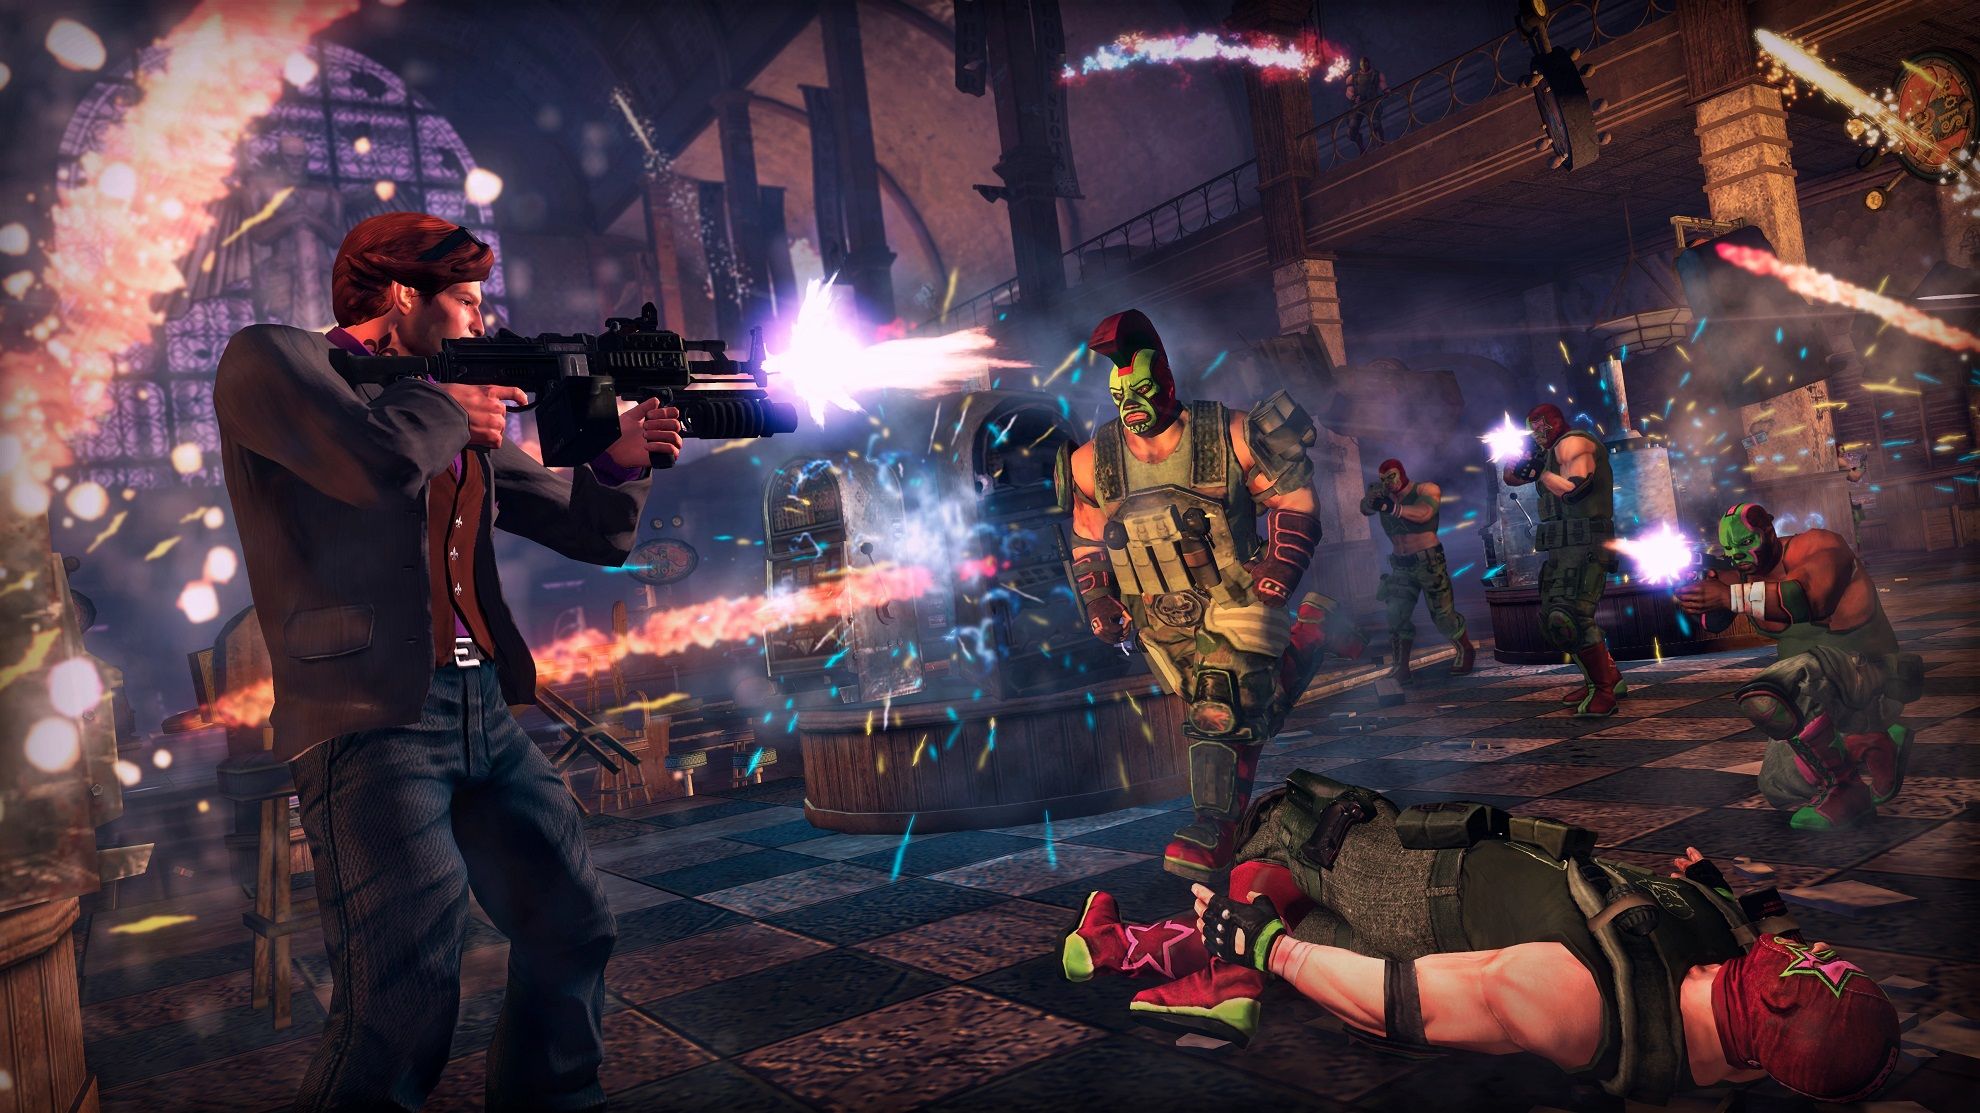 Saints Row 5 Rumored As a Direct Sequel To Saints Row: The Third